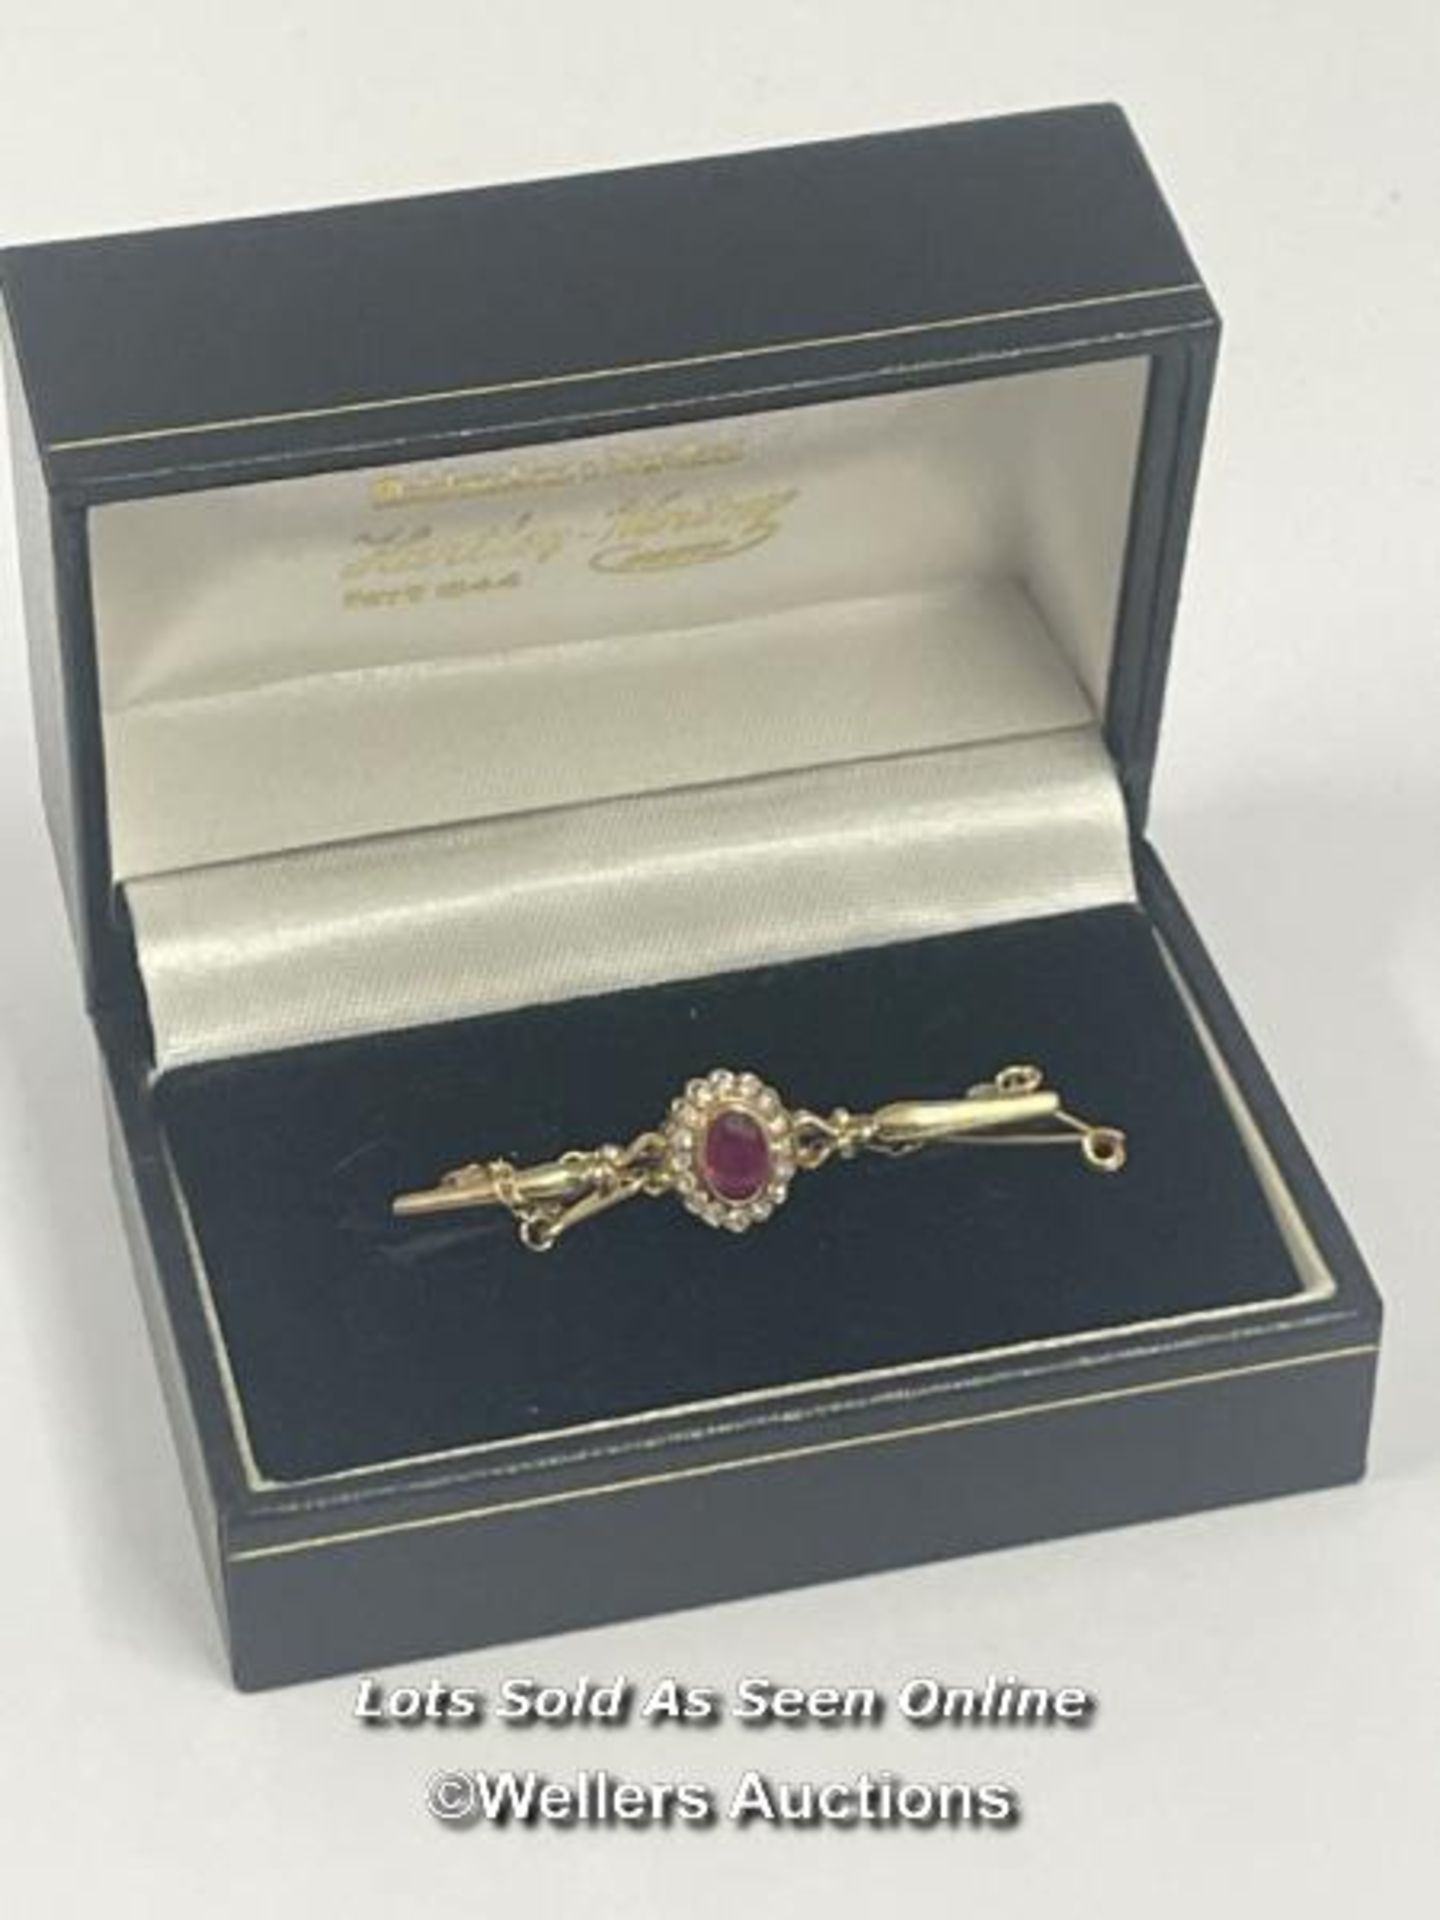 RUBY AND DIAMOND BAR BROOCH WITH SAFETY CHAIN, RUBY ESTIMATED WEIGHT 0.54CT, DIAMONDS ESTIMATED - Image 4 of 5